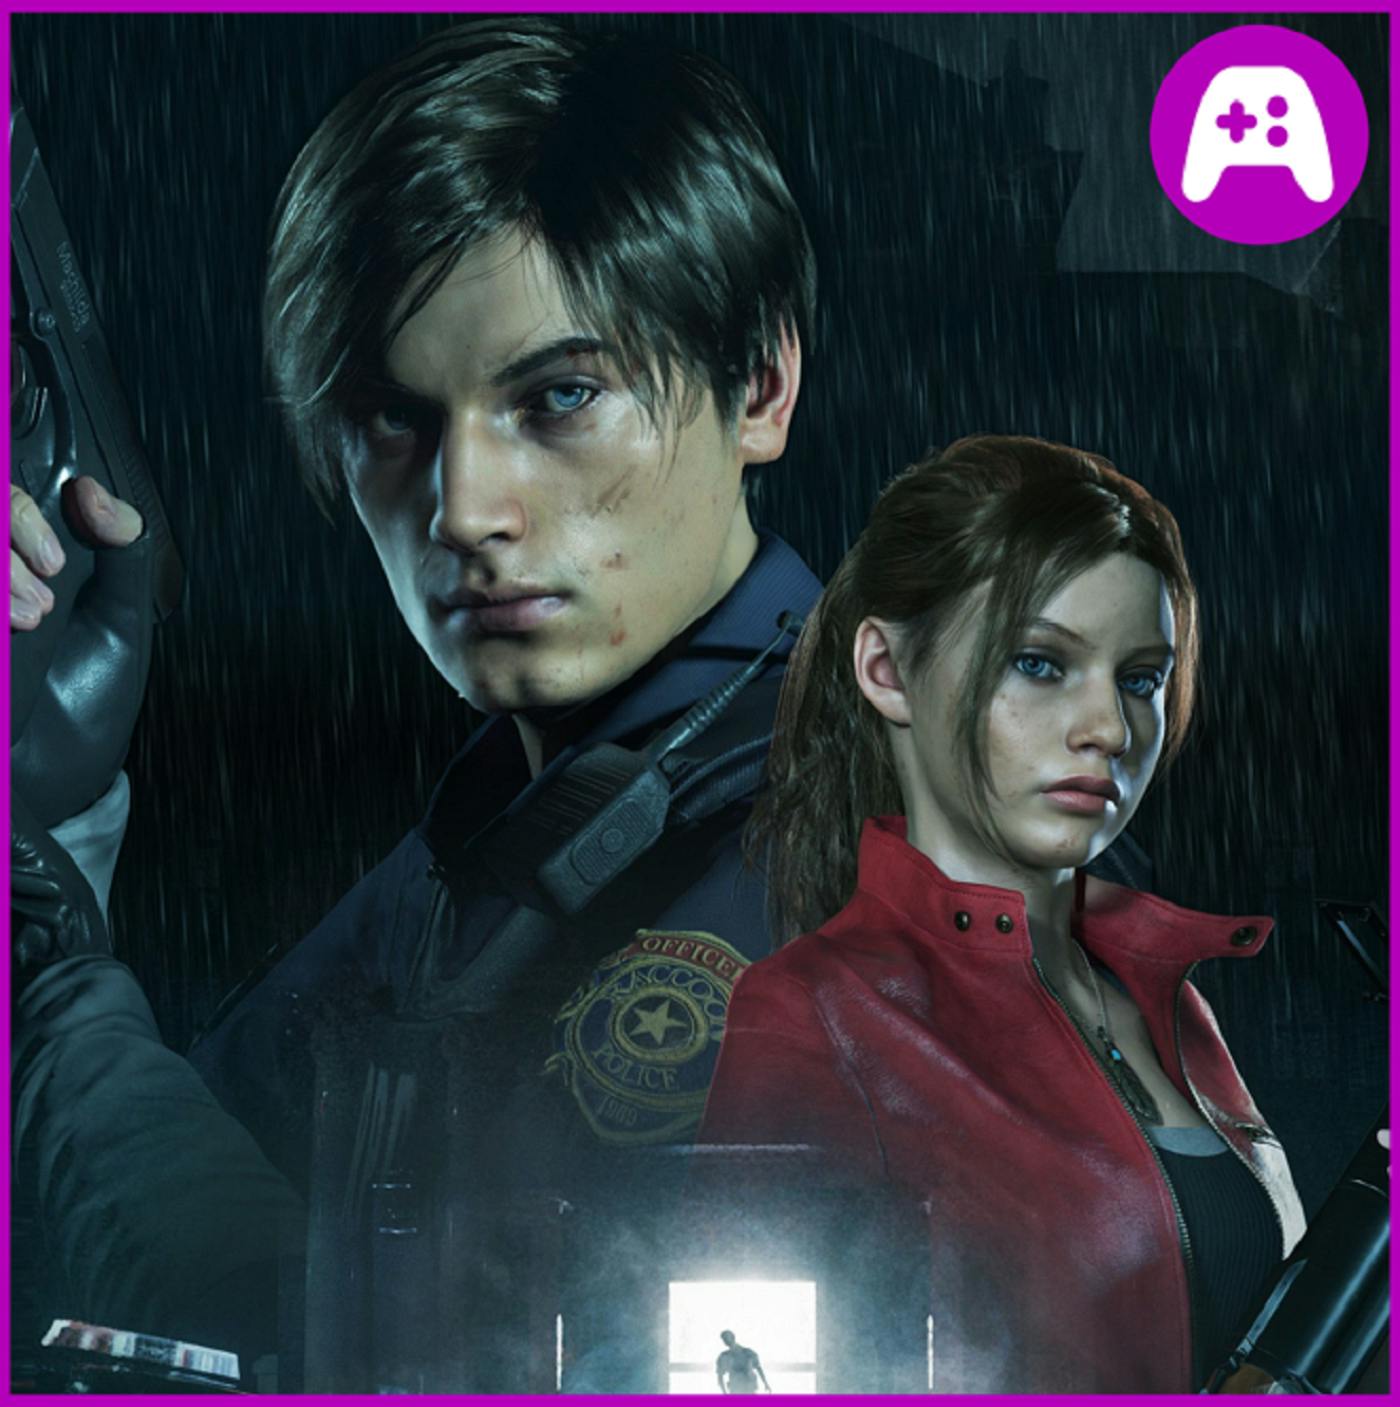 Resident Evil 2 Review and Anthem Hands-On - What’s Good Games (Ep. 89)